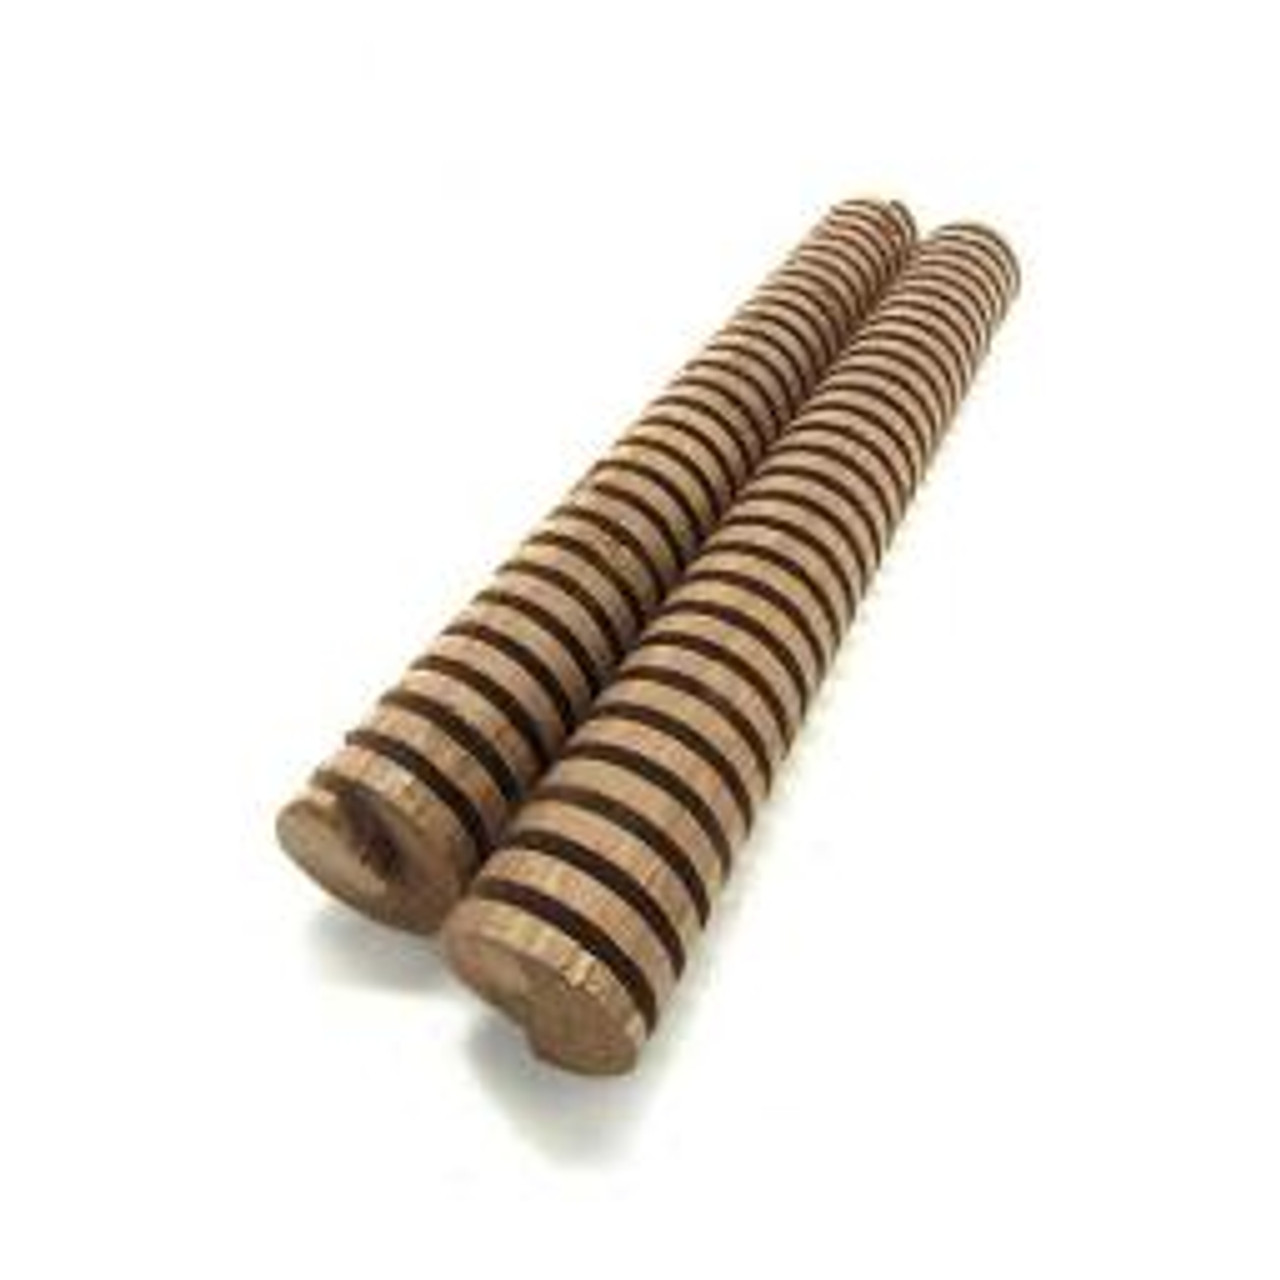 American White Oak Infusion Spirals For Beer and Wine Making Medium Toast 